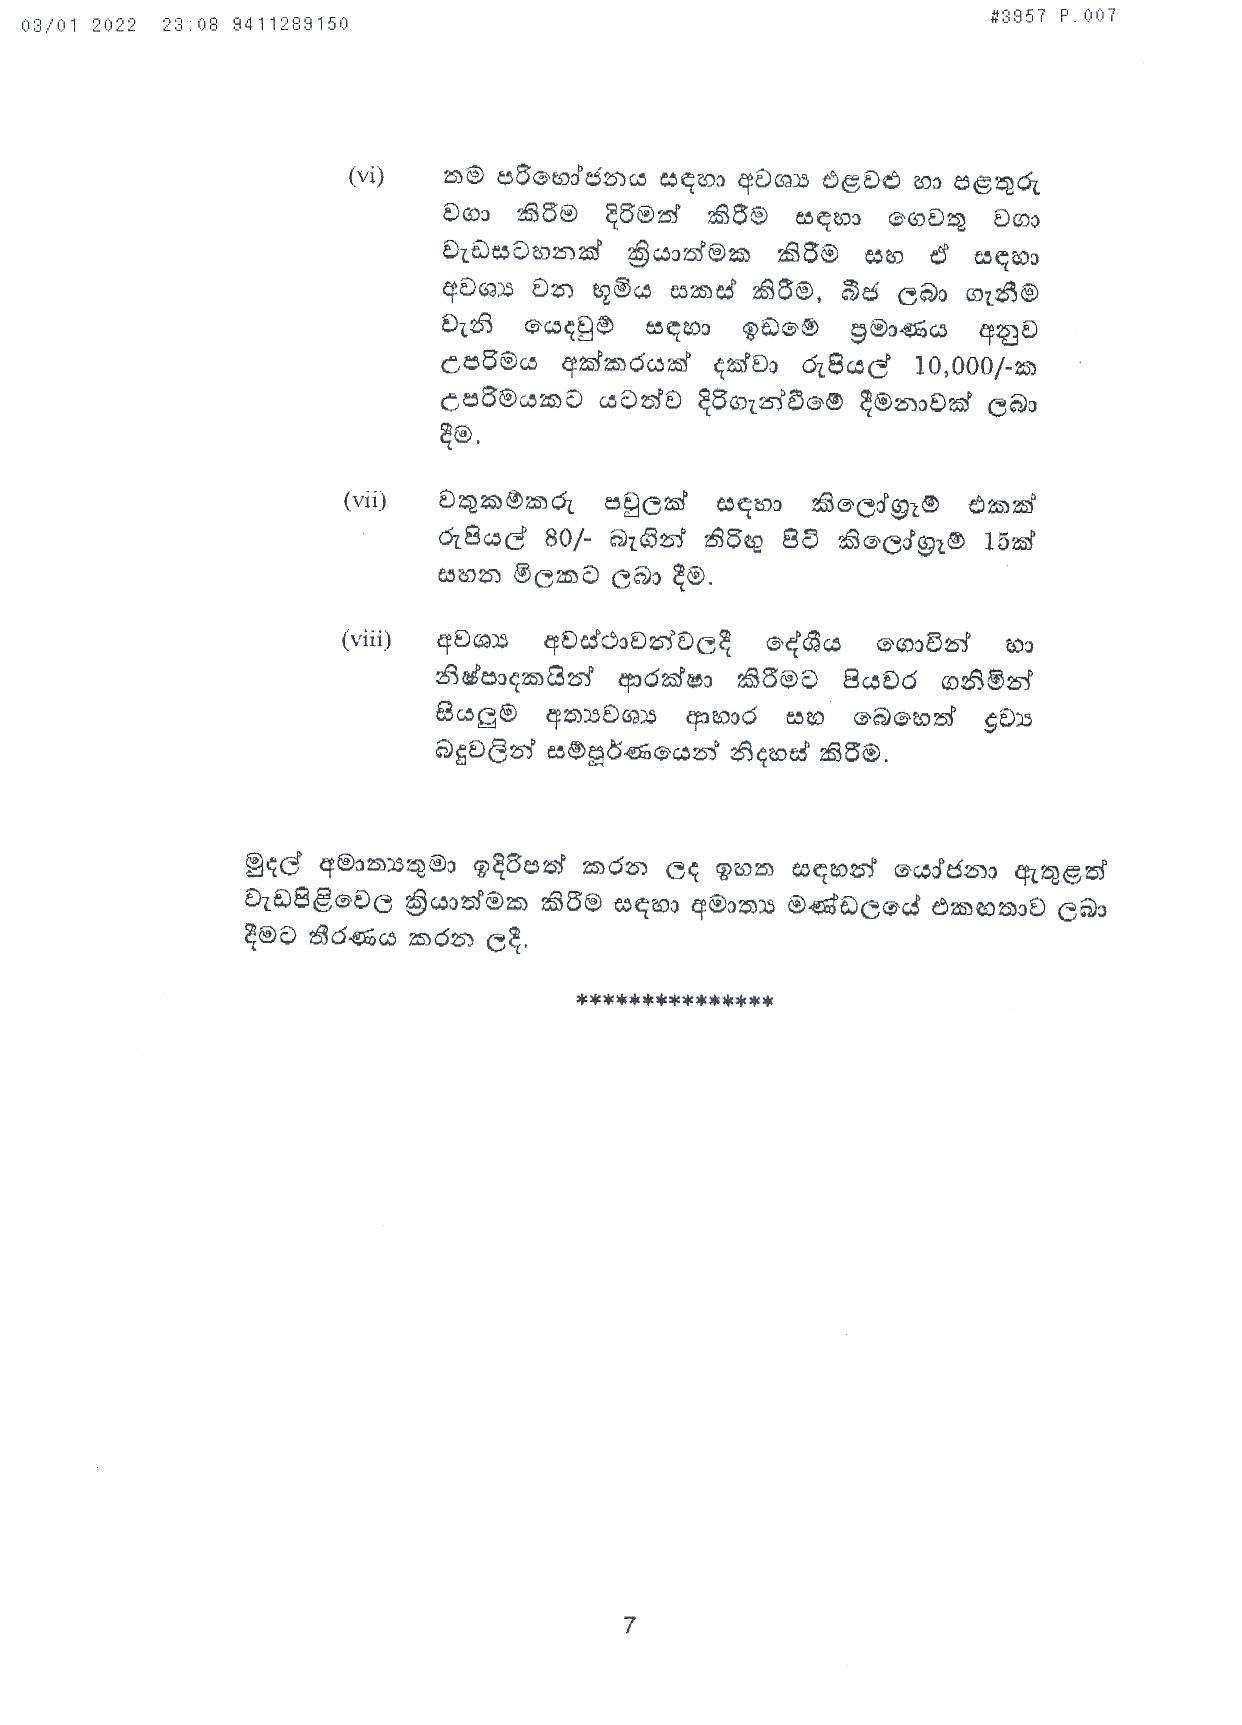 Cabinet Decision on 03.01.2022 page 007